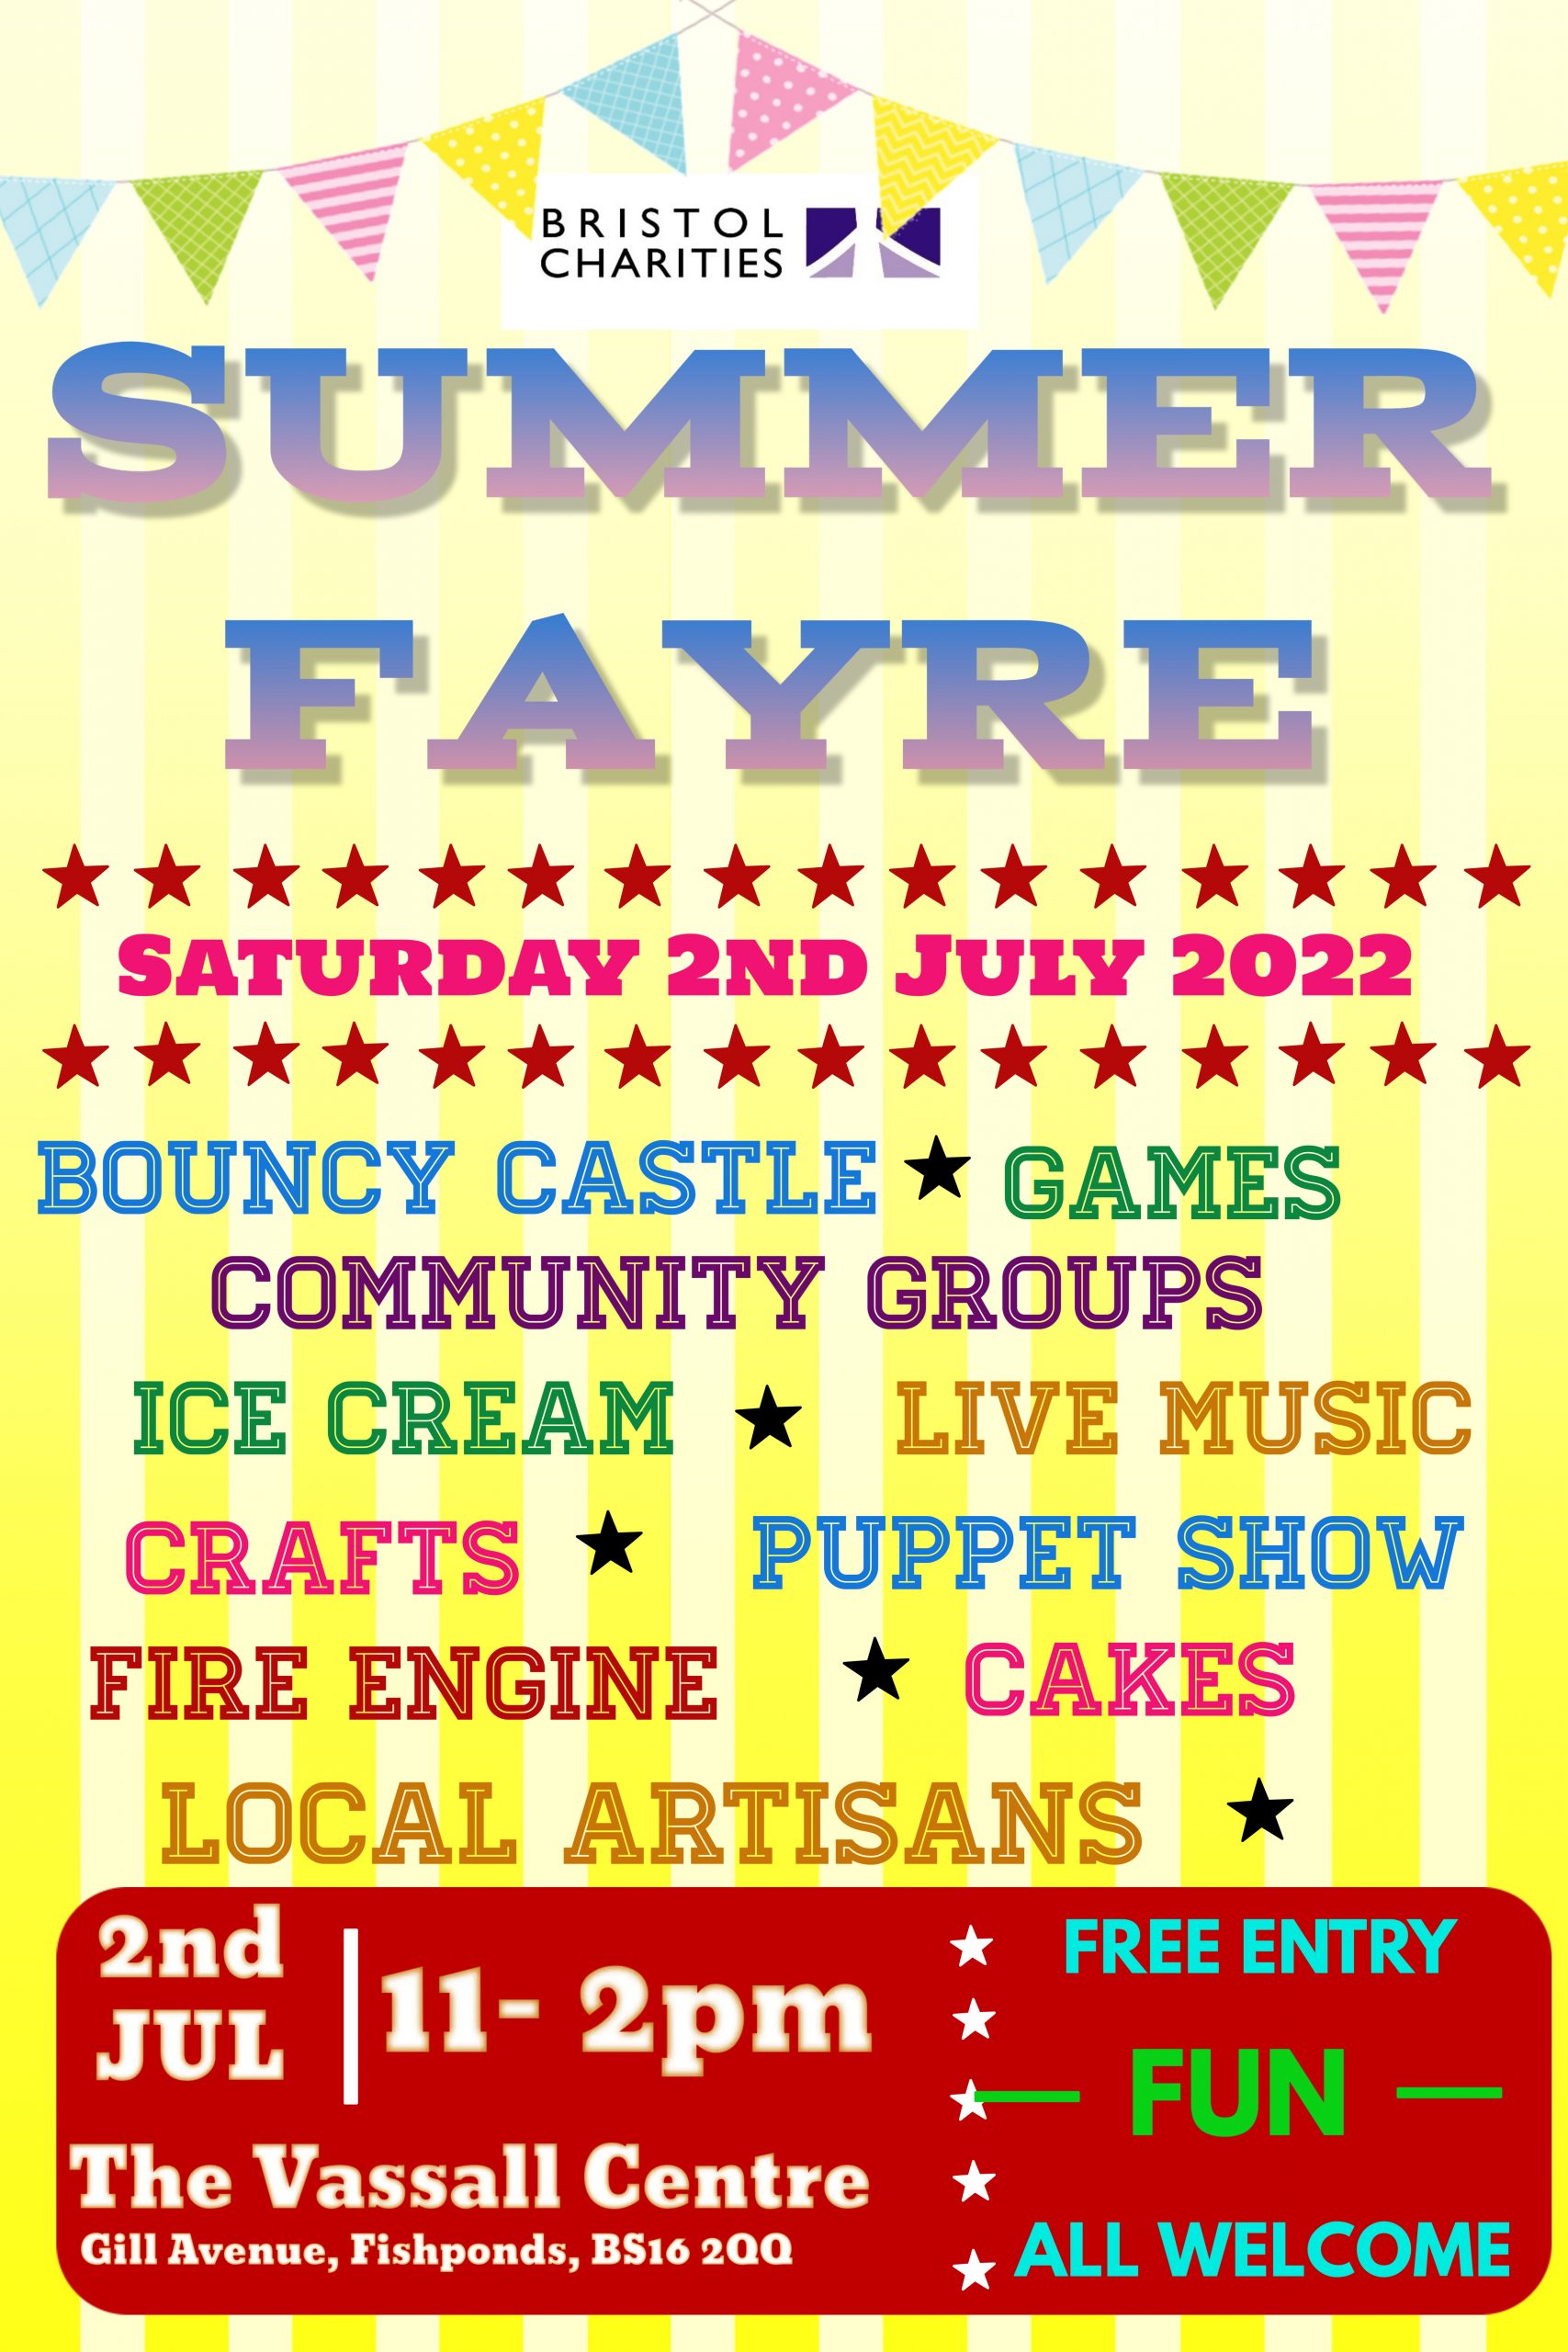 Copy of Summer Fayre Poster (003)